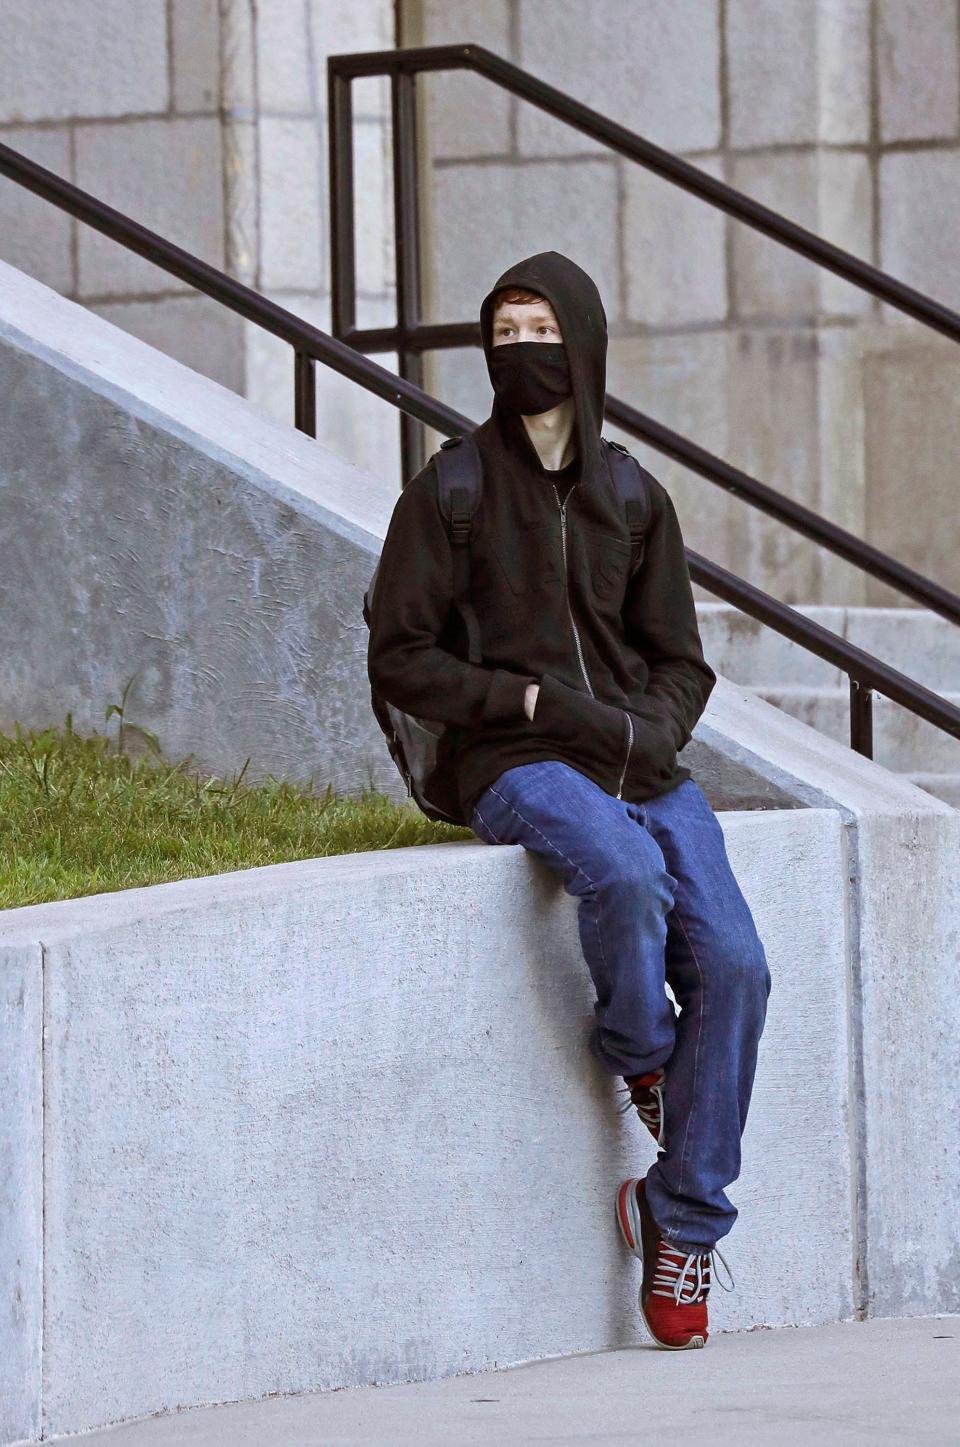 Nason Debauche, 18, waits near the entrance to Manitowoc Lincoln High School on the first day of classes, Monday, August 30, 2021, in Manitowoc, Wis. According to the district website, universal facial coverings will be required until conditions change in order to fight the COVID pandemic.